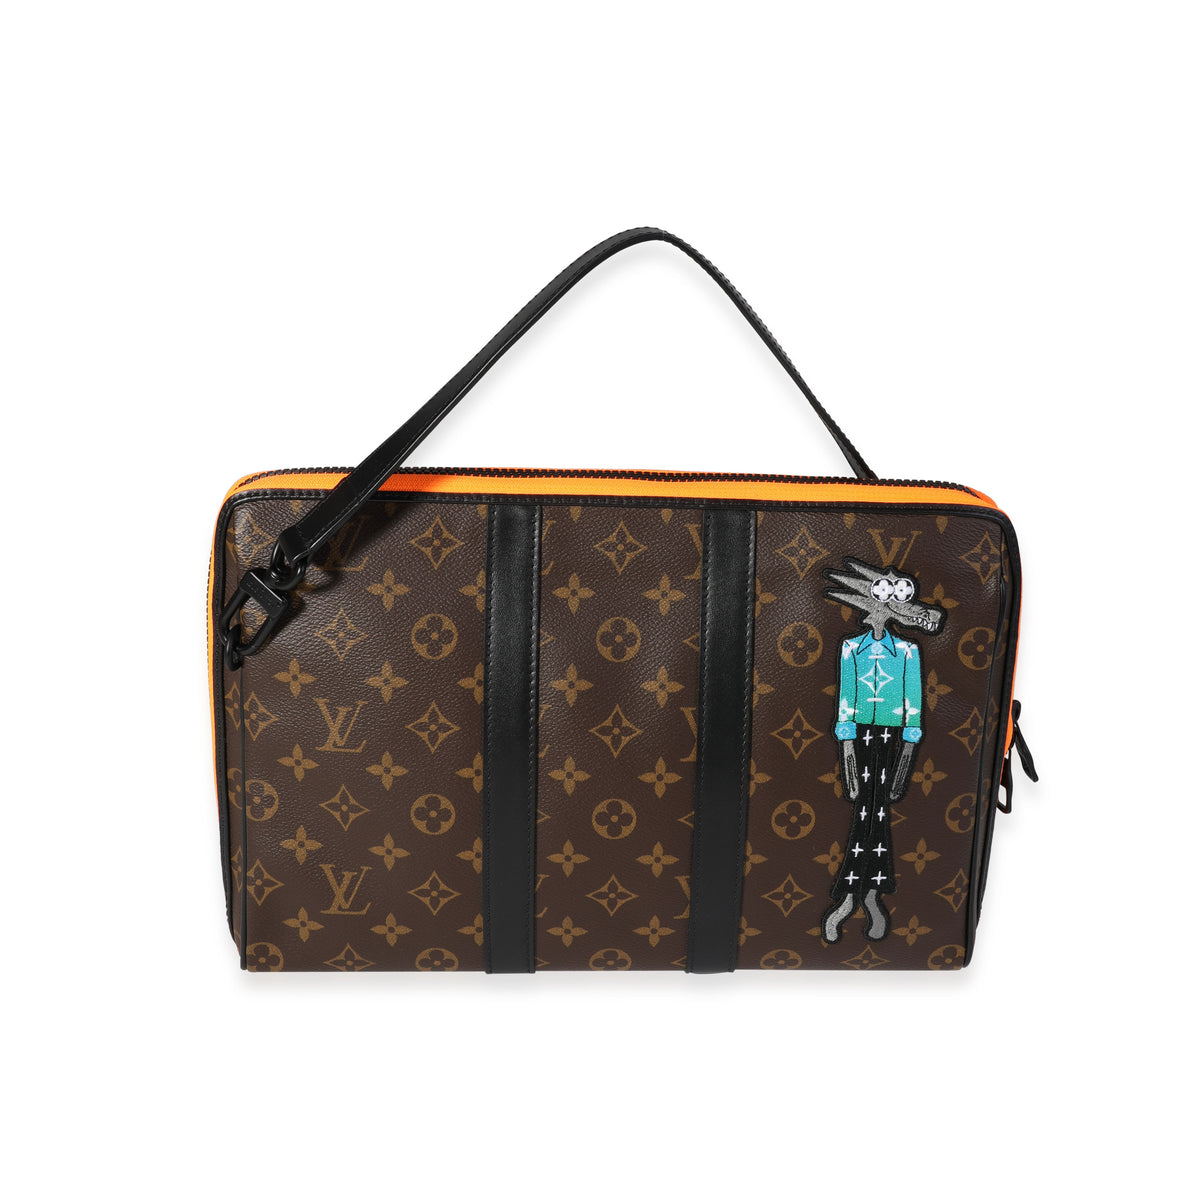 Louis Vuitton Monogram Canvas Cartoon Zoom With Friends Keepall Pouch